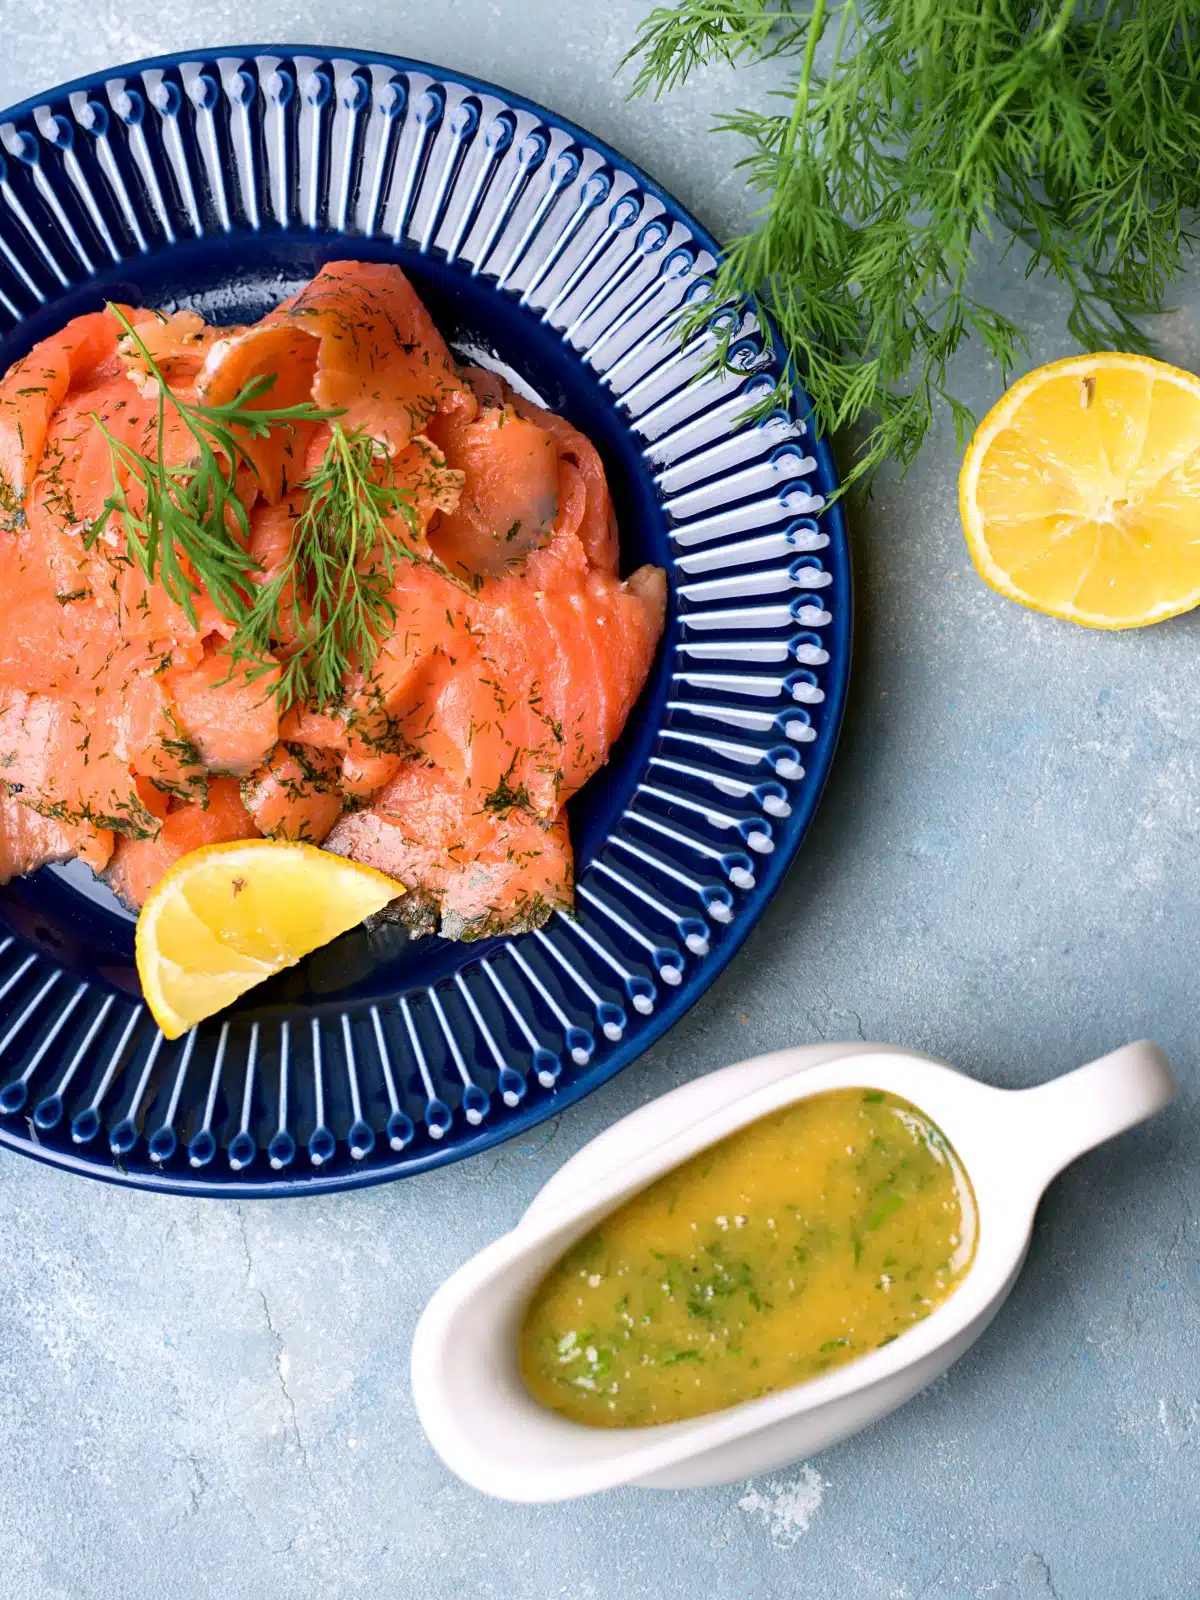 A large plate with cured salmon and lemon wedges with some dill mustard sauce.